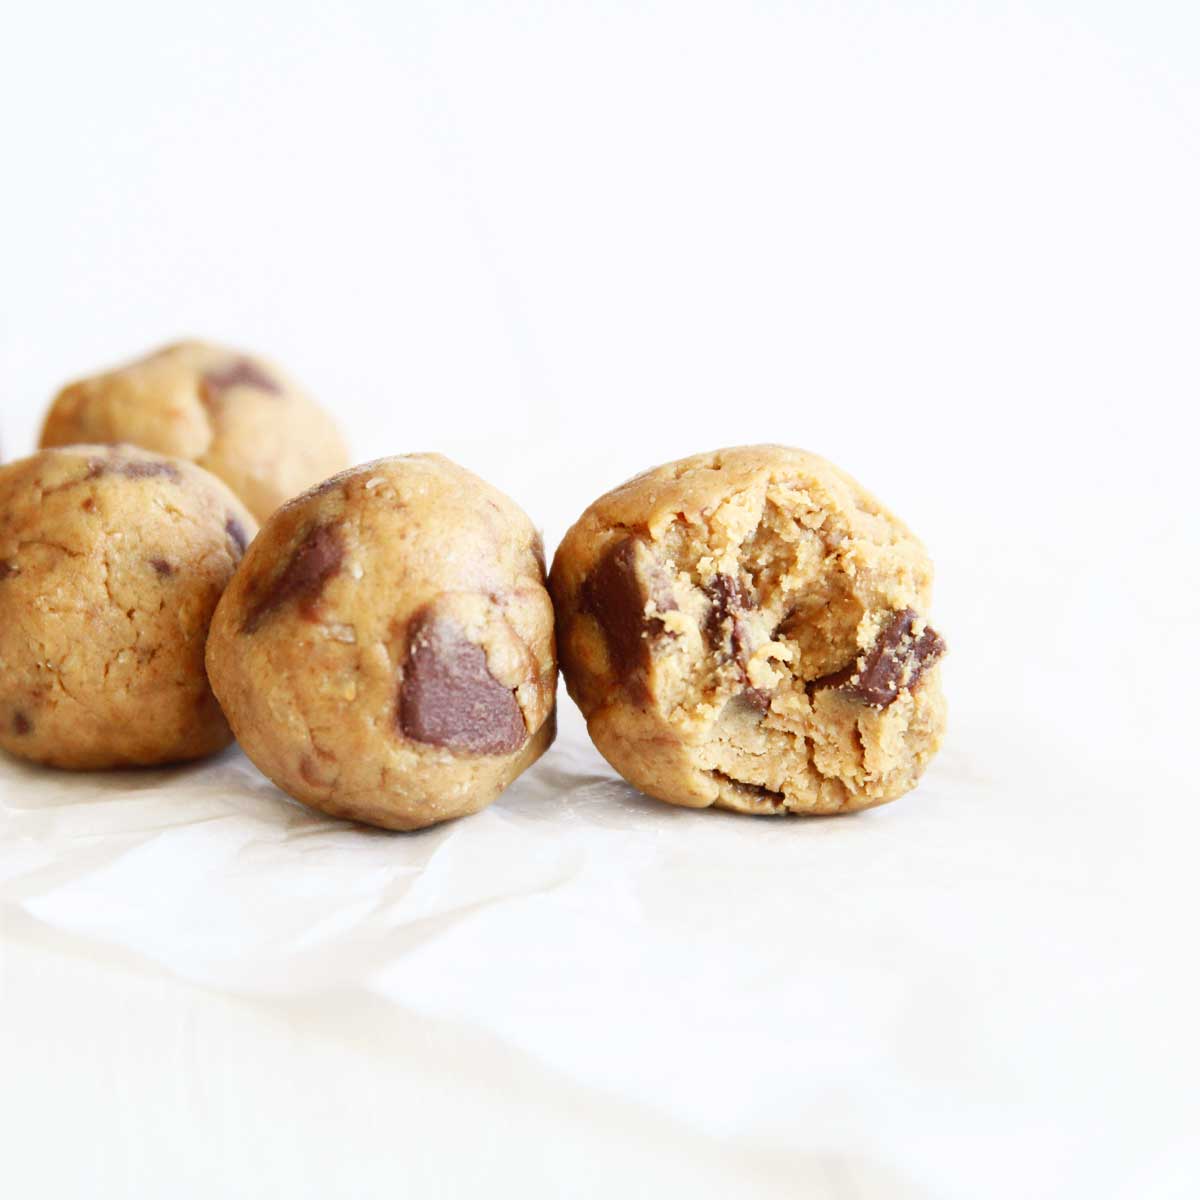 Peanut Butter Cookie Dough Protein Balls (No-Bake, Vegan Recipe with Oats) - Canned Chickpea Yeast Bread